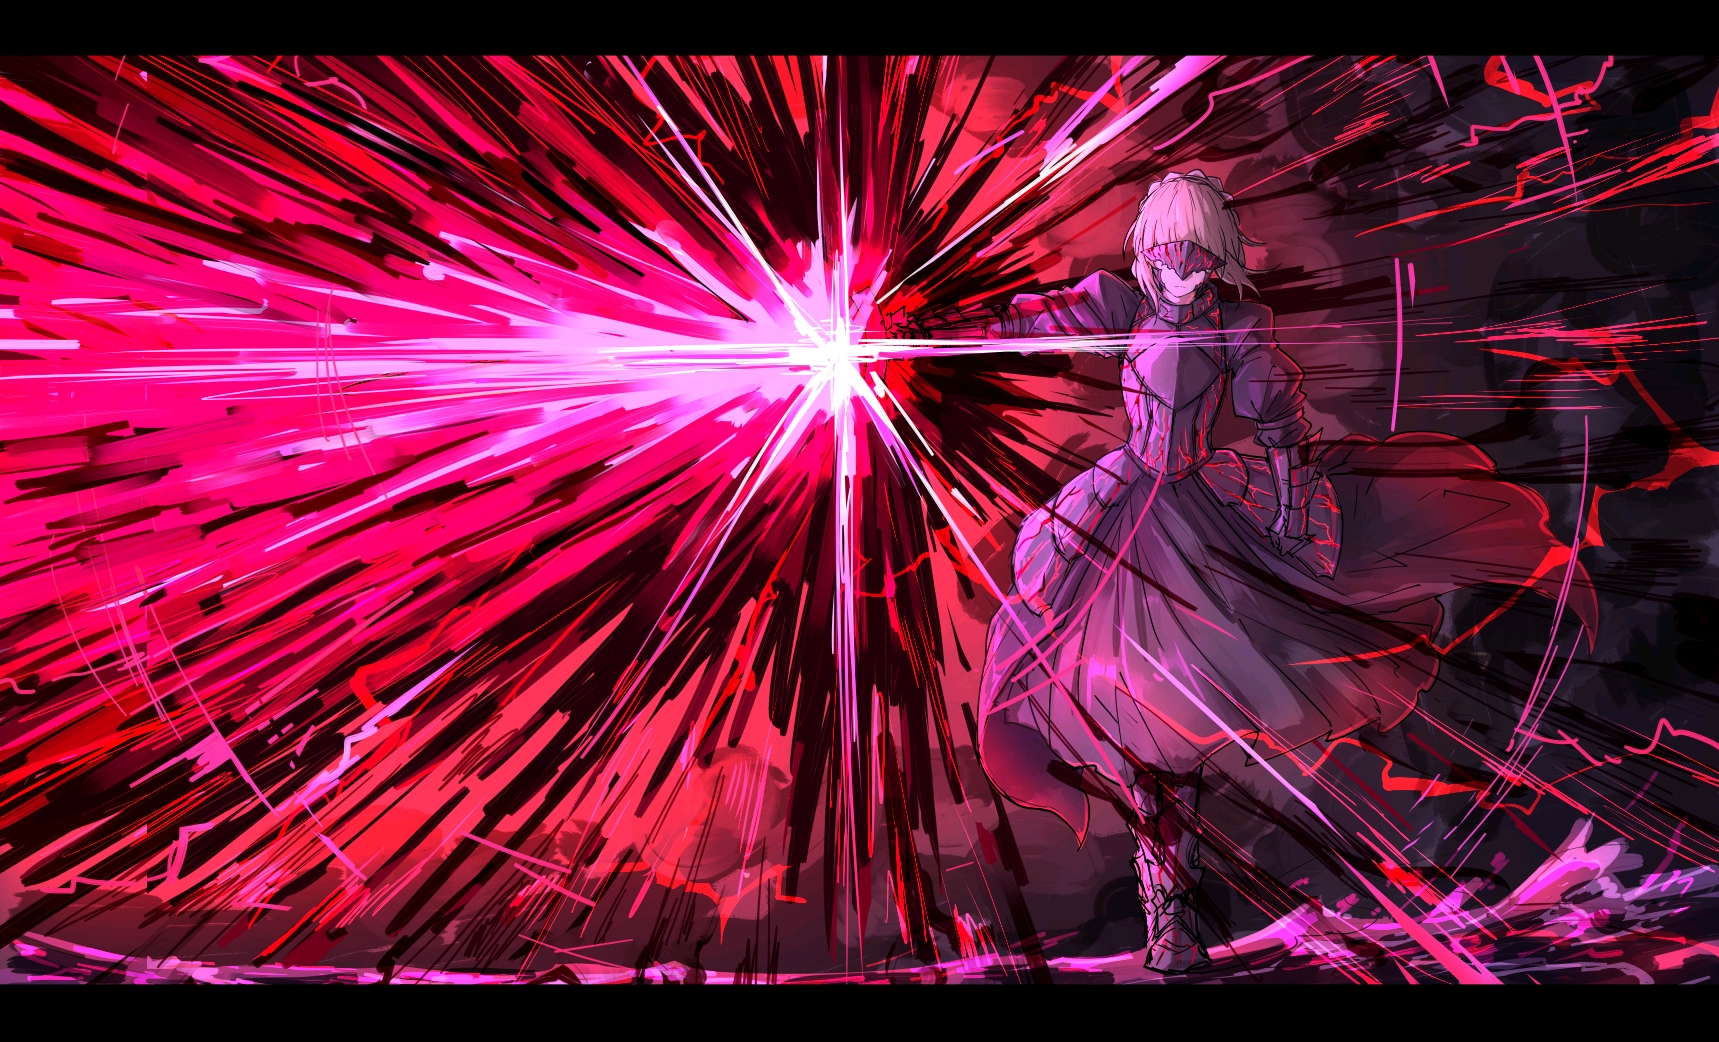 Saber in a beautiful forest - Fate/stay night wallpaper - Anime ...